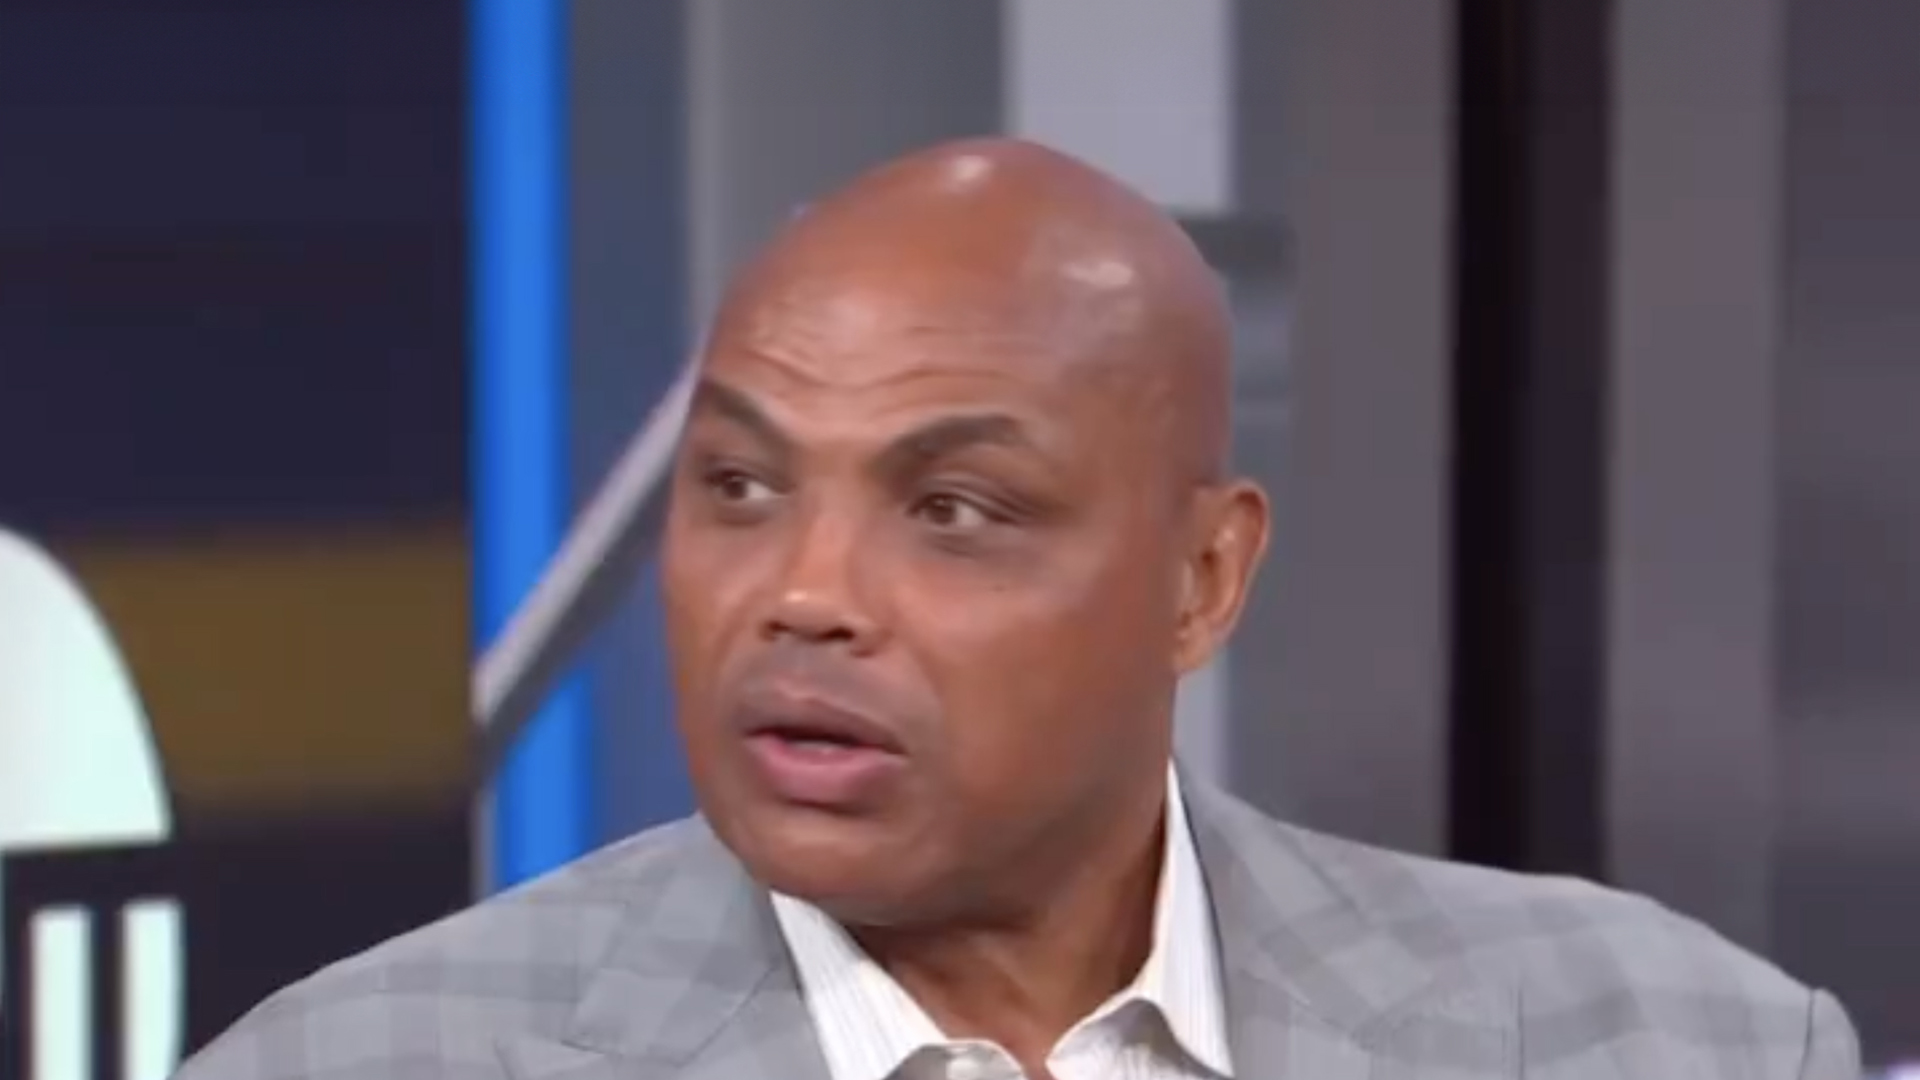 ‘Dirty as hell,’ jokes Charles Barkley as NBA icon doubles down on Galveston beach rant with ‘steel-toed boots’ comment [Video]